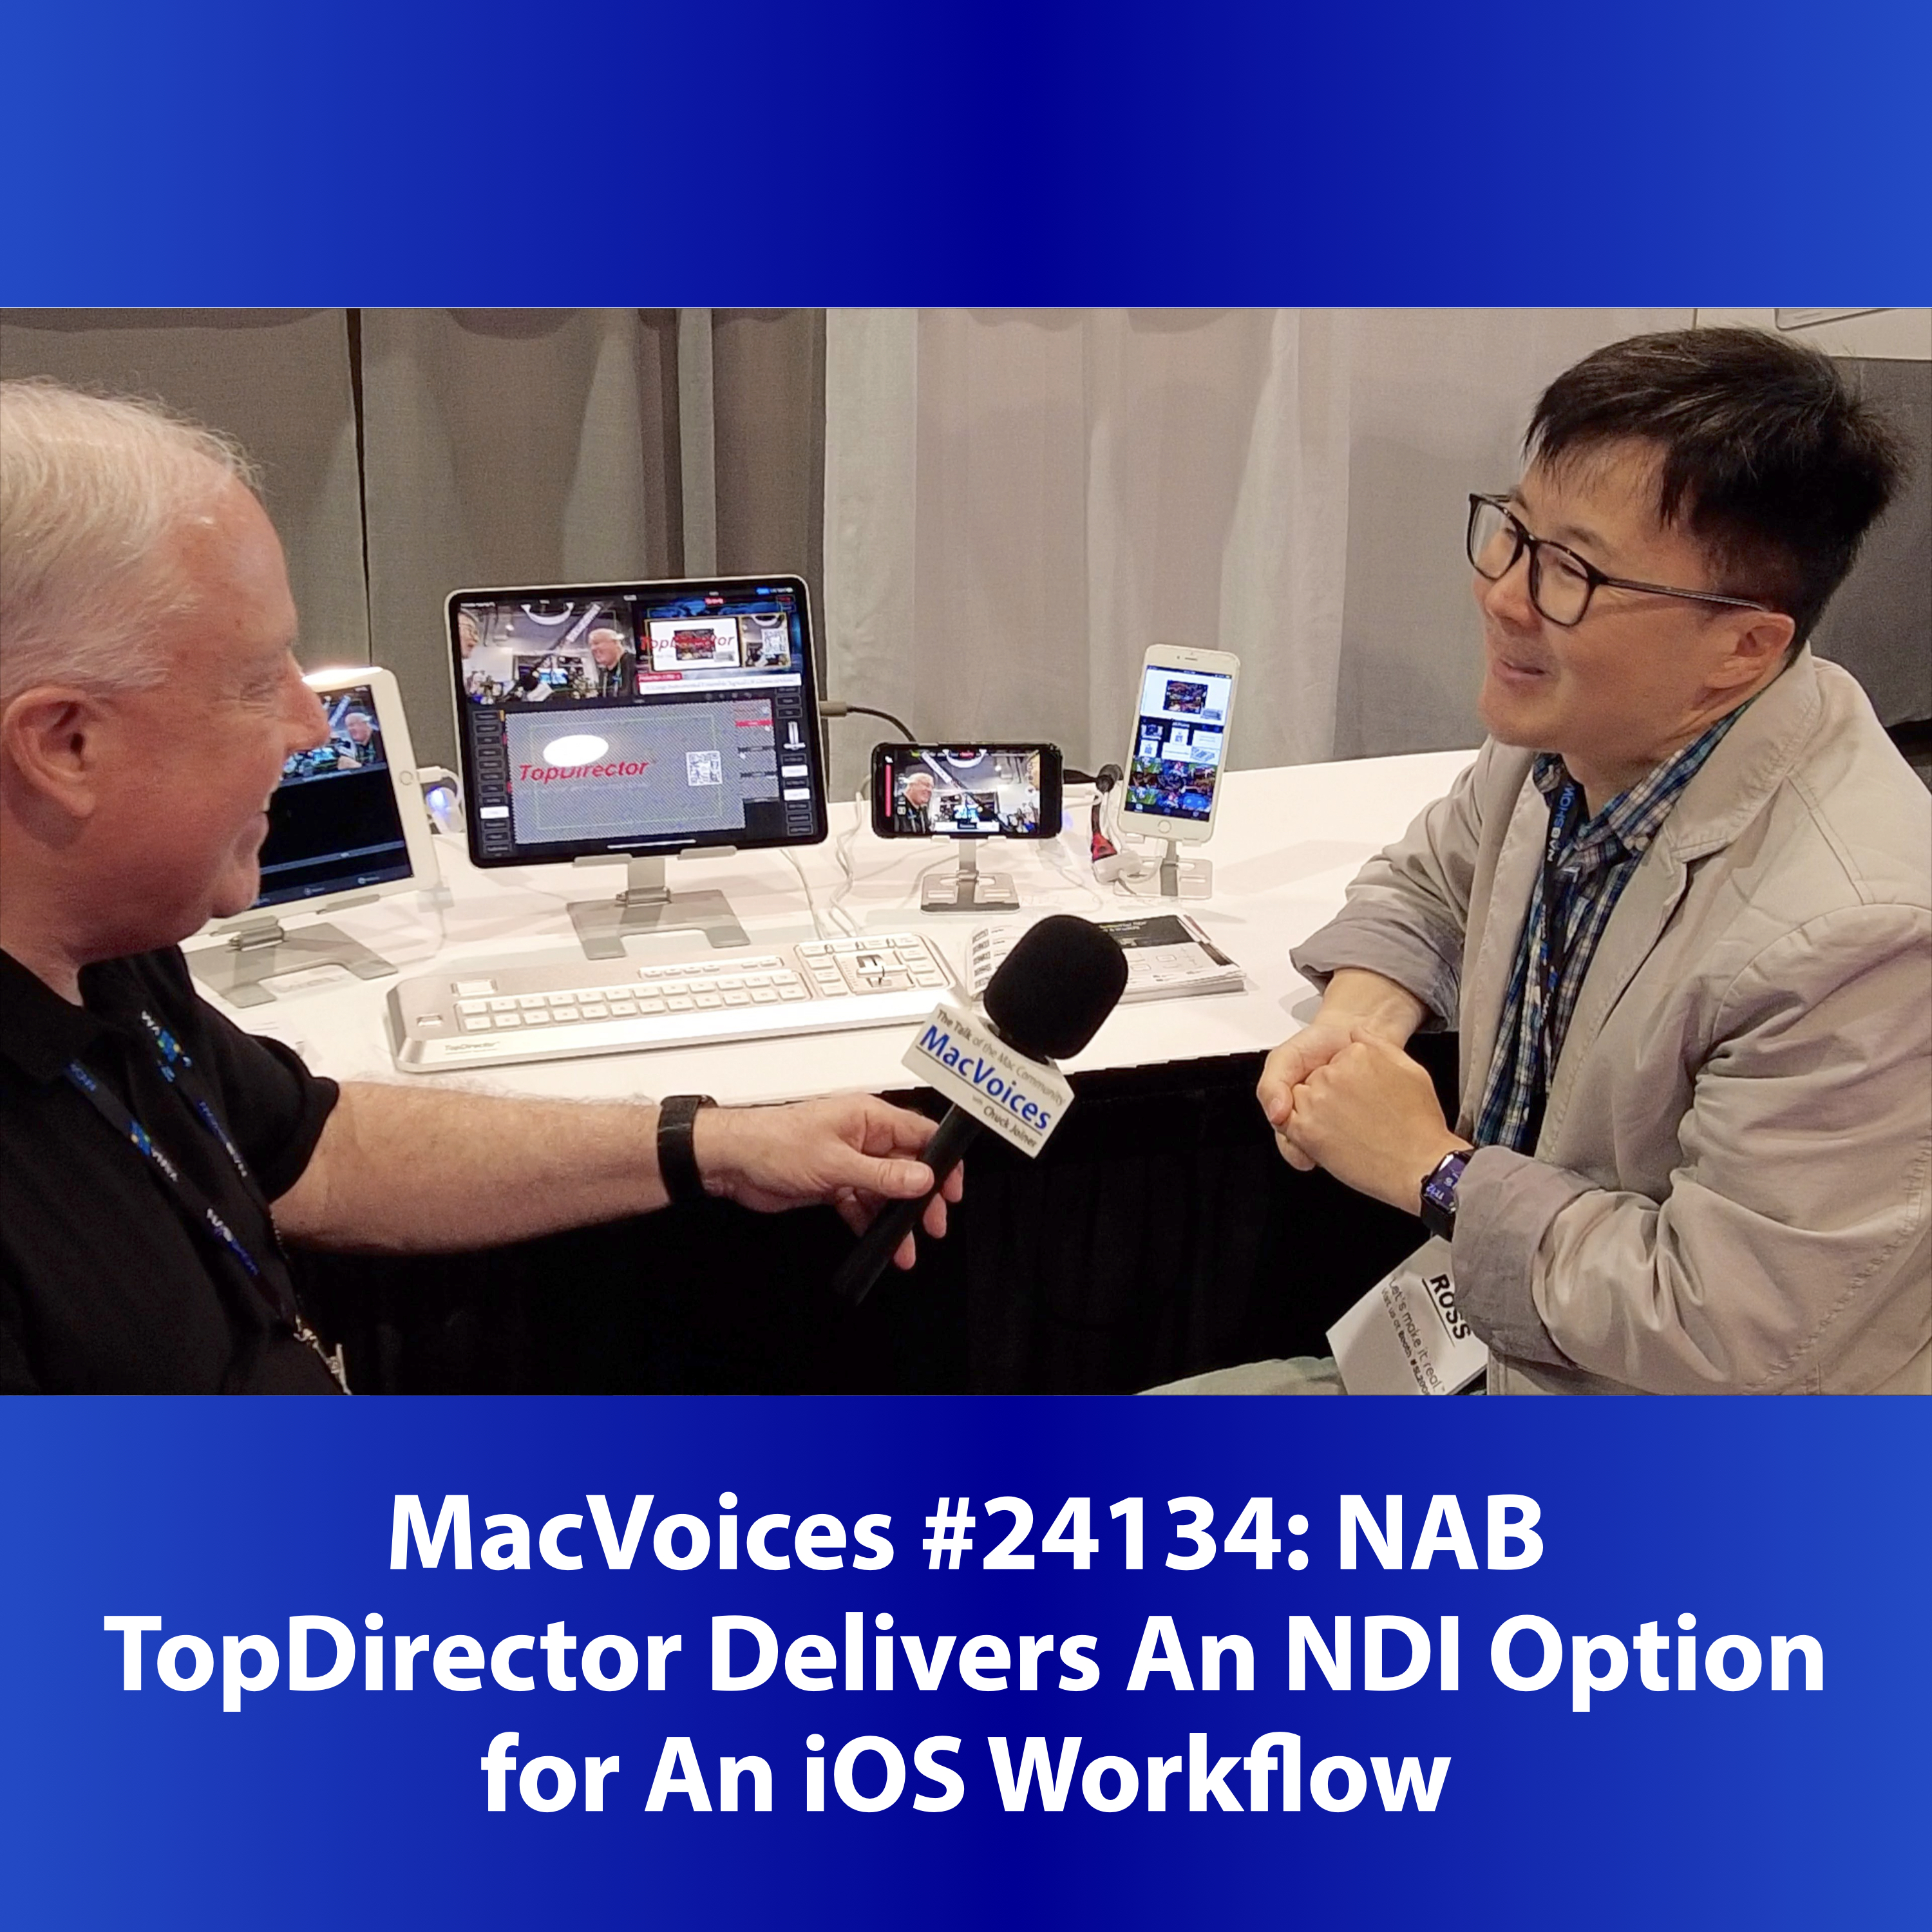 MacVoices #24134: NAB - TopDirector Delivers An NDI Option for An iOS Workflow